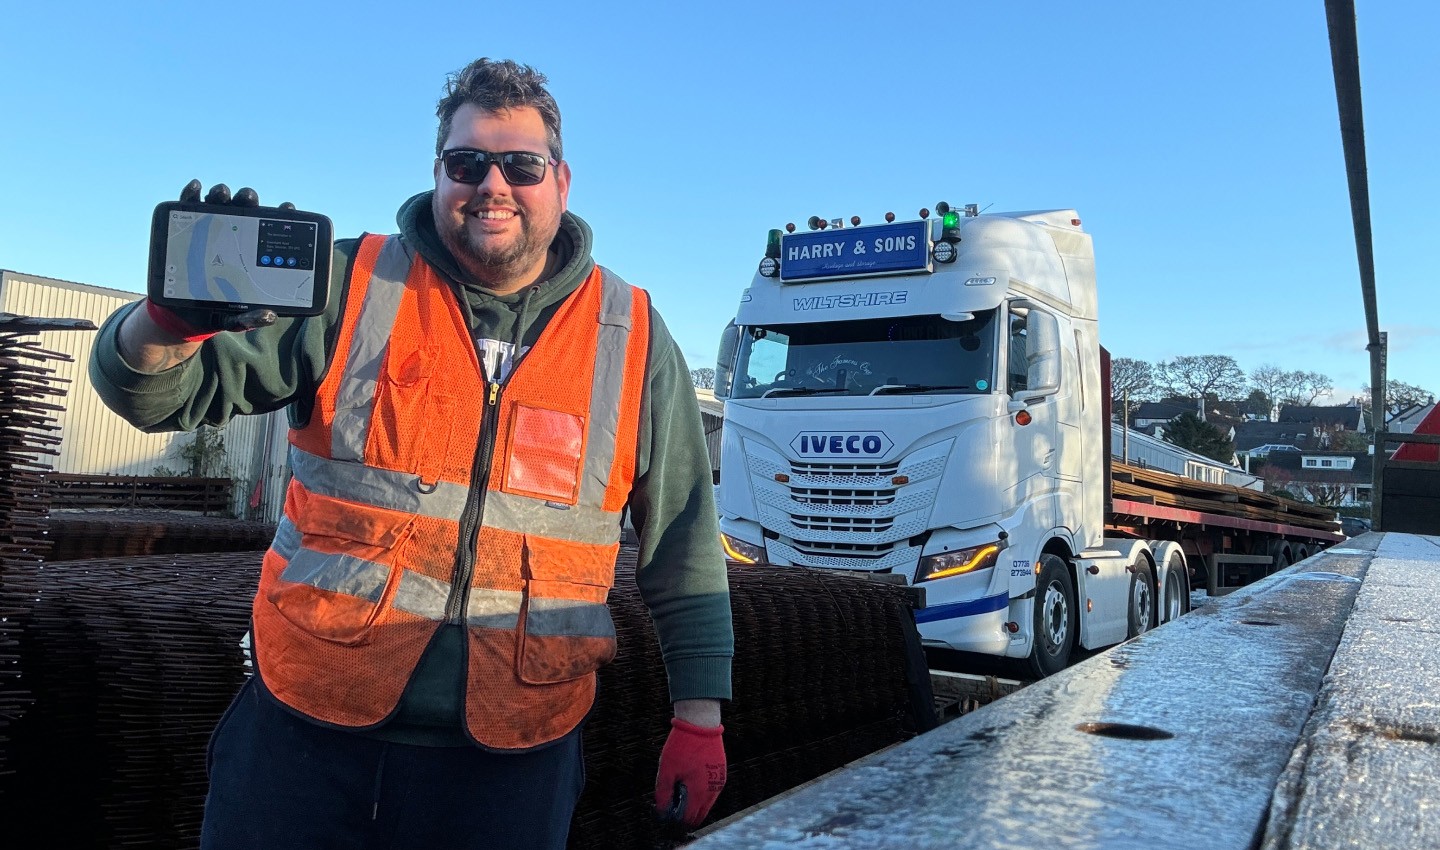 Truck driver, Luke C in a HGV, with his TomTom navigation device and beloved truck.